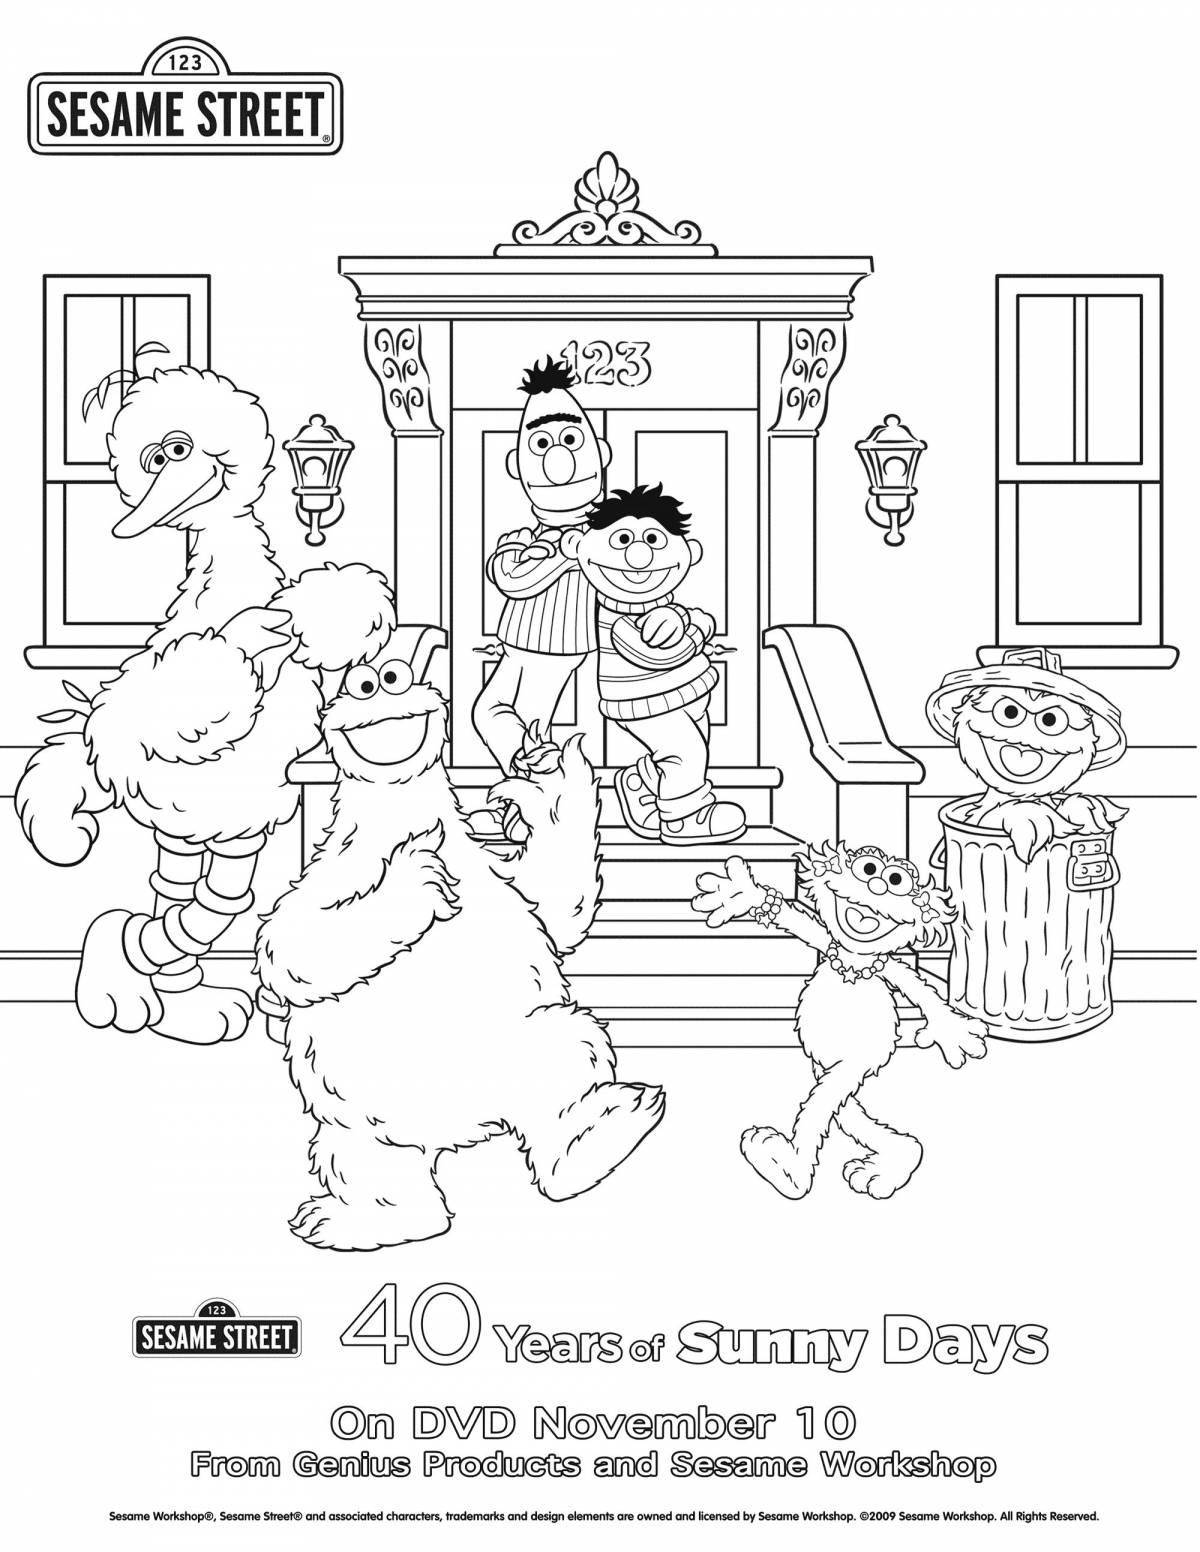 Beautiful sesame street coloring page